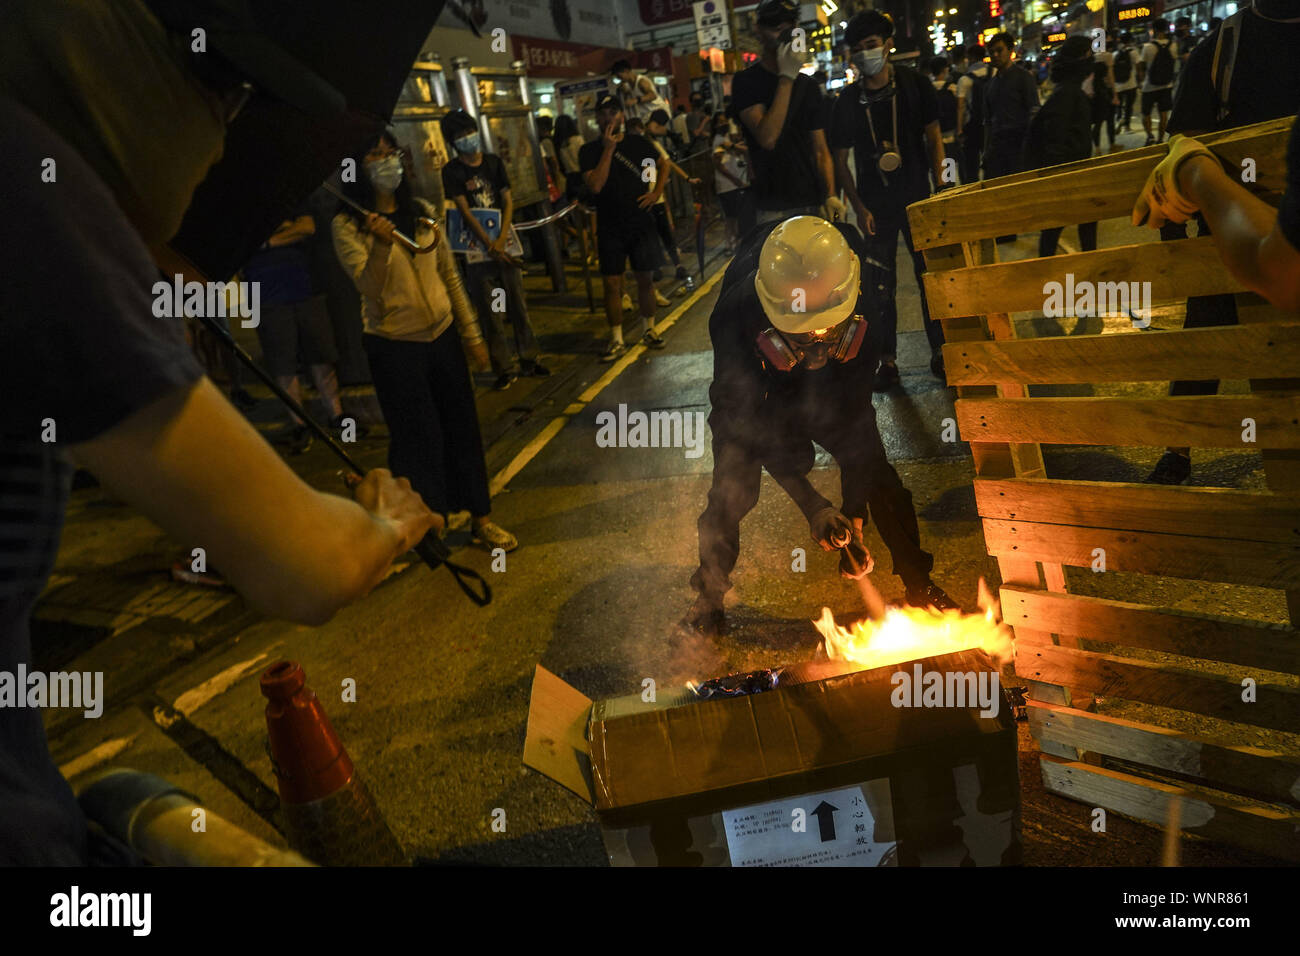 Kowloon, Hong Kong. 6th Sep, 2019. A protester ignites a spray can to set barricade on fire on Friday September 6, 2019.in Mong Kok Town Kowloon, Hong Kong.Thousands of protestors gathered outside of Mong Kok police station and around that area to protest the police violence against citizens of Hong Kong.Protesters Moved Nathan Rd to south, destroying surveillance cameras, street signs, building barricades with wooden panes and garbages then set on fire as they move on.9/6/2019.Kowloon, Hong Kong. Credit: ZUMA Press, Inc./Alamy Live News Stock Photo